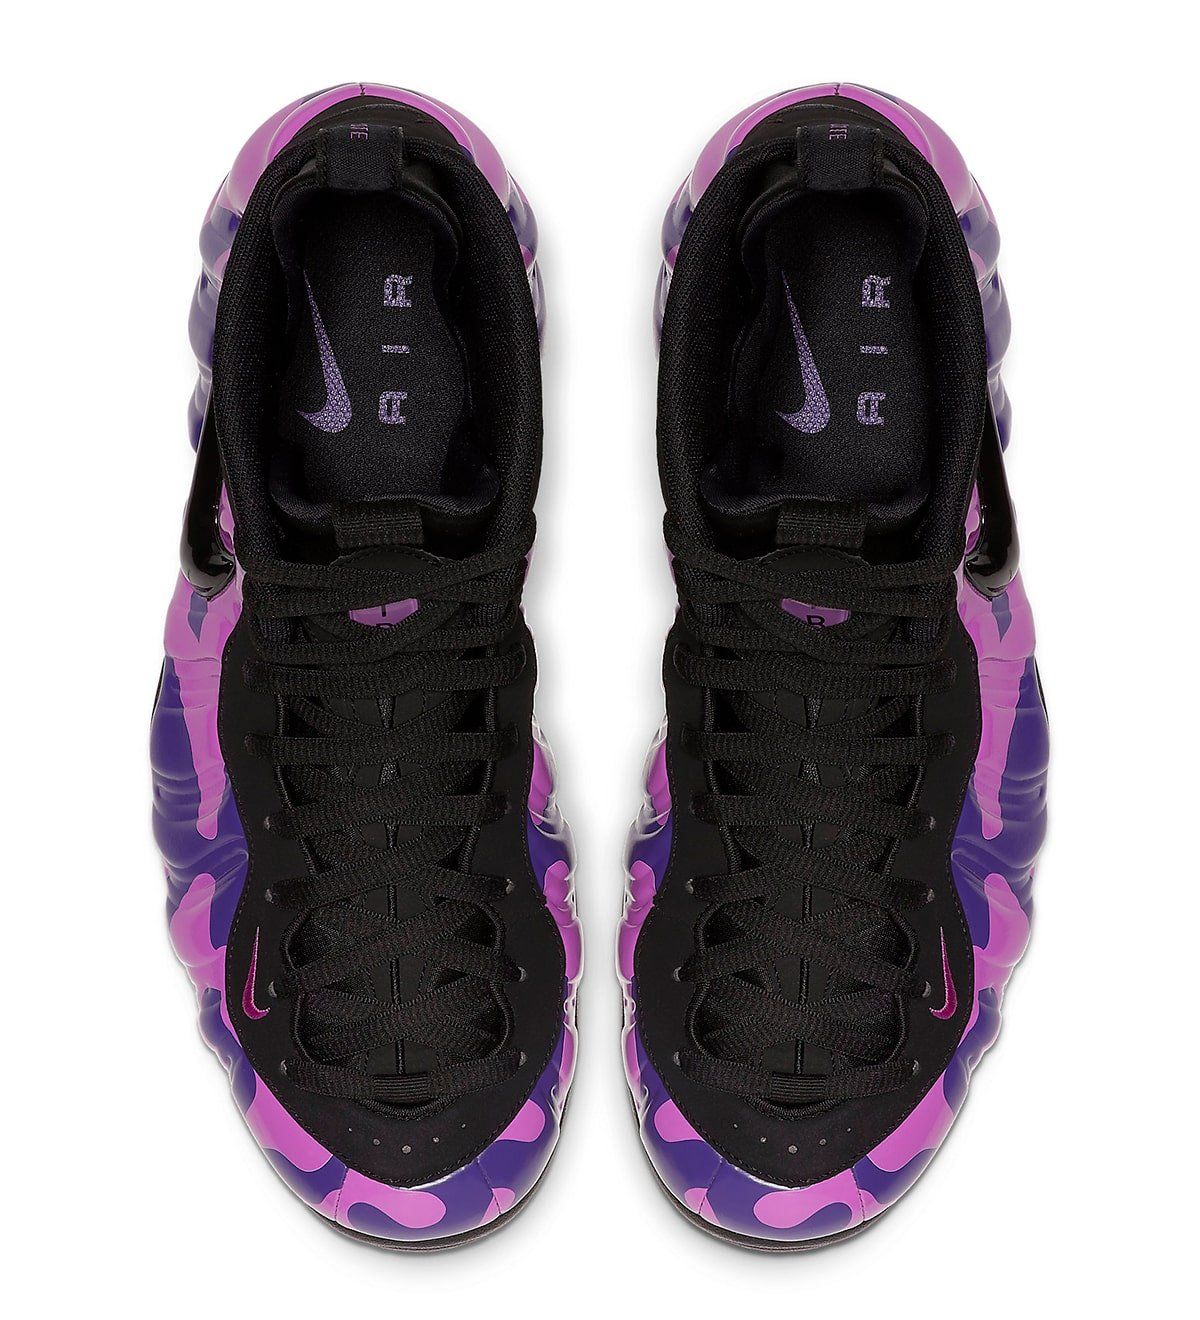 purple and pink camo foamposites